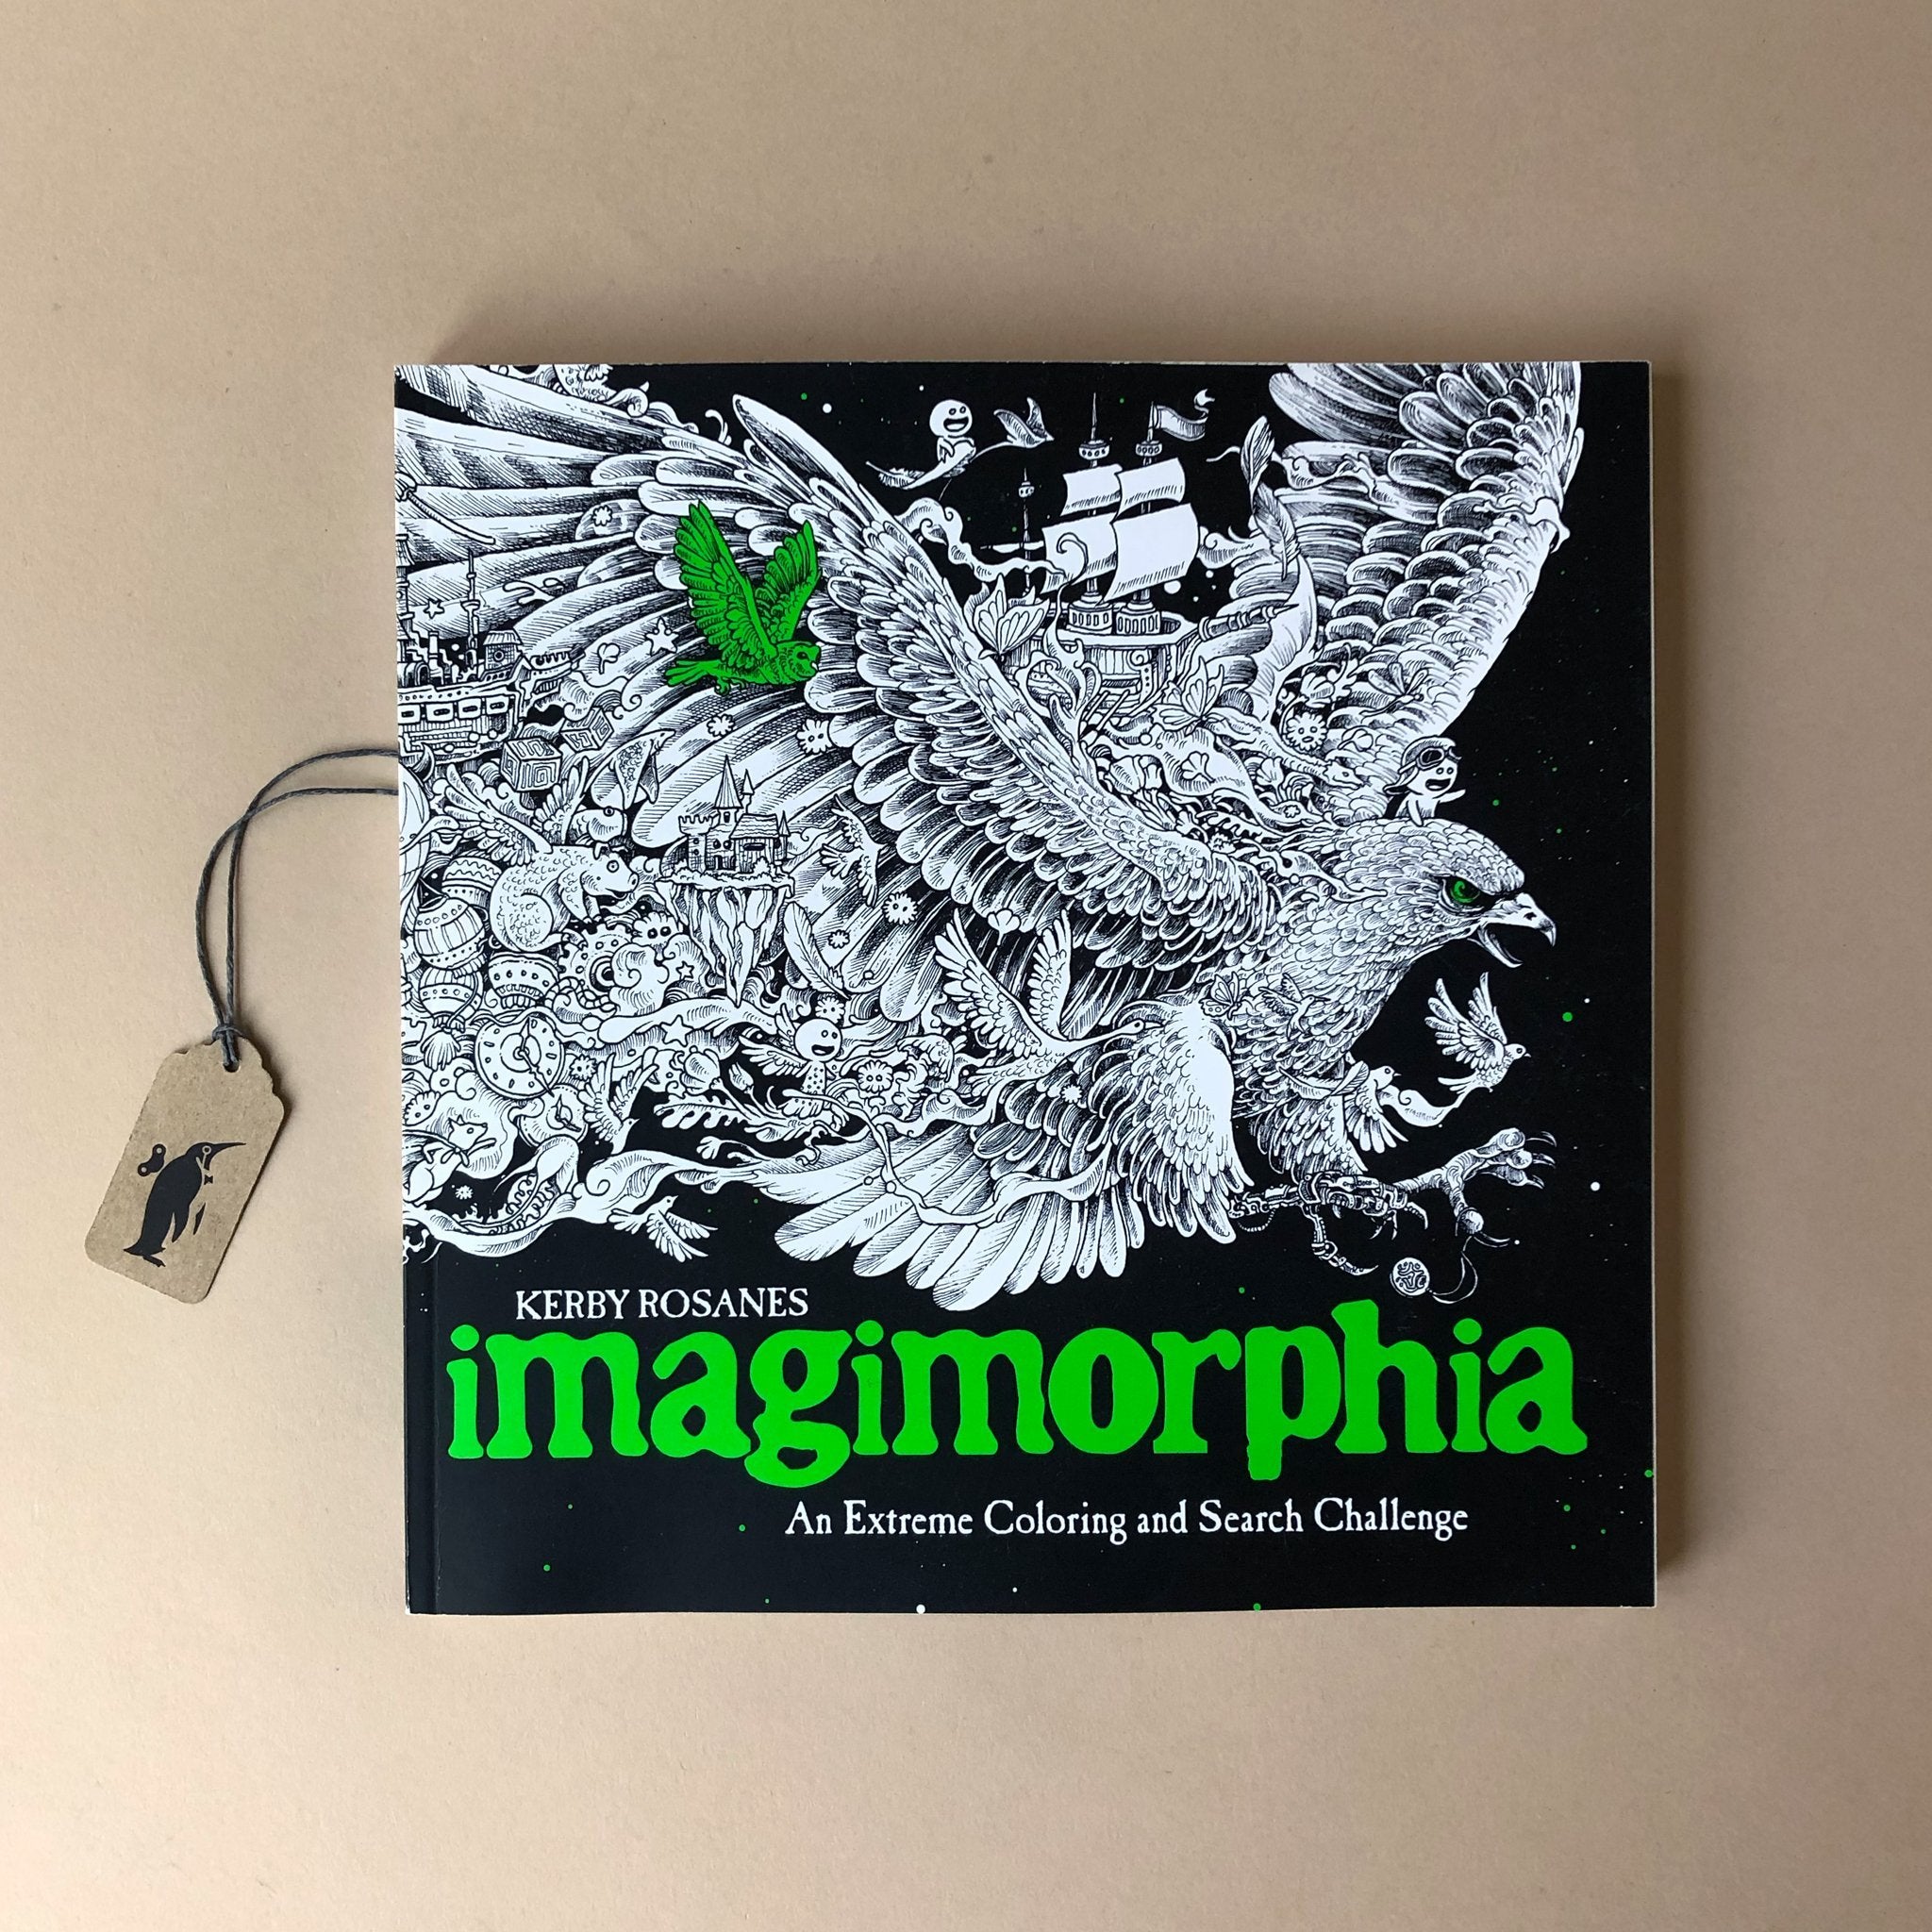 Mythomorphia: An Extreme Coloring and Search Challenge [Book]